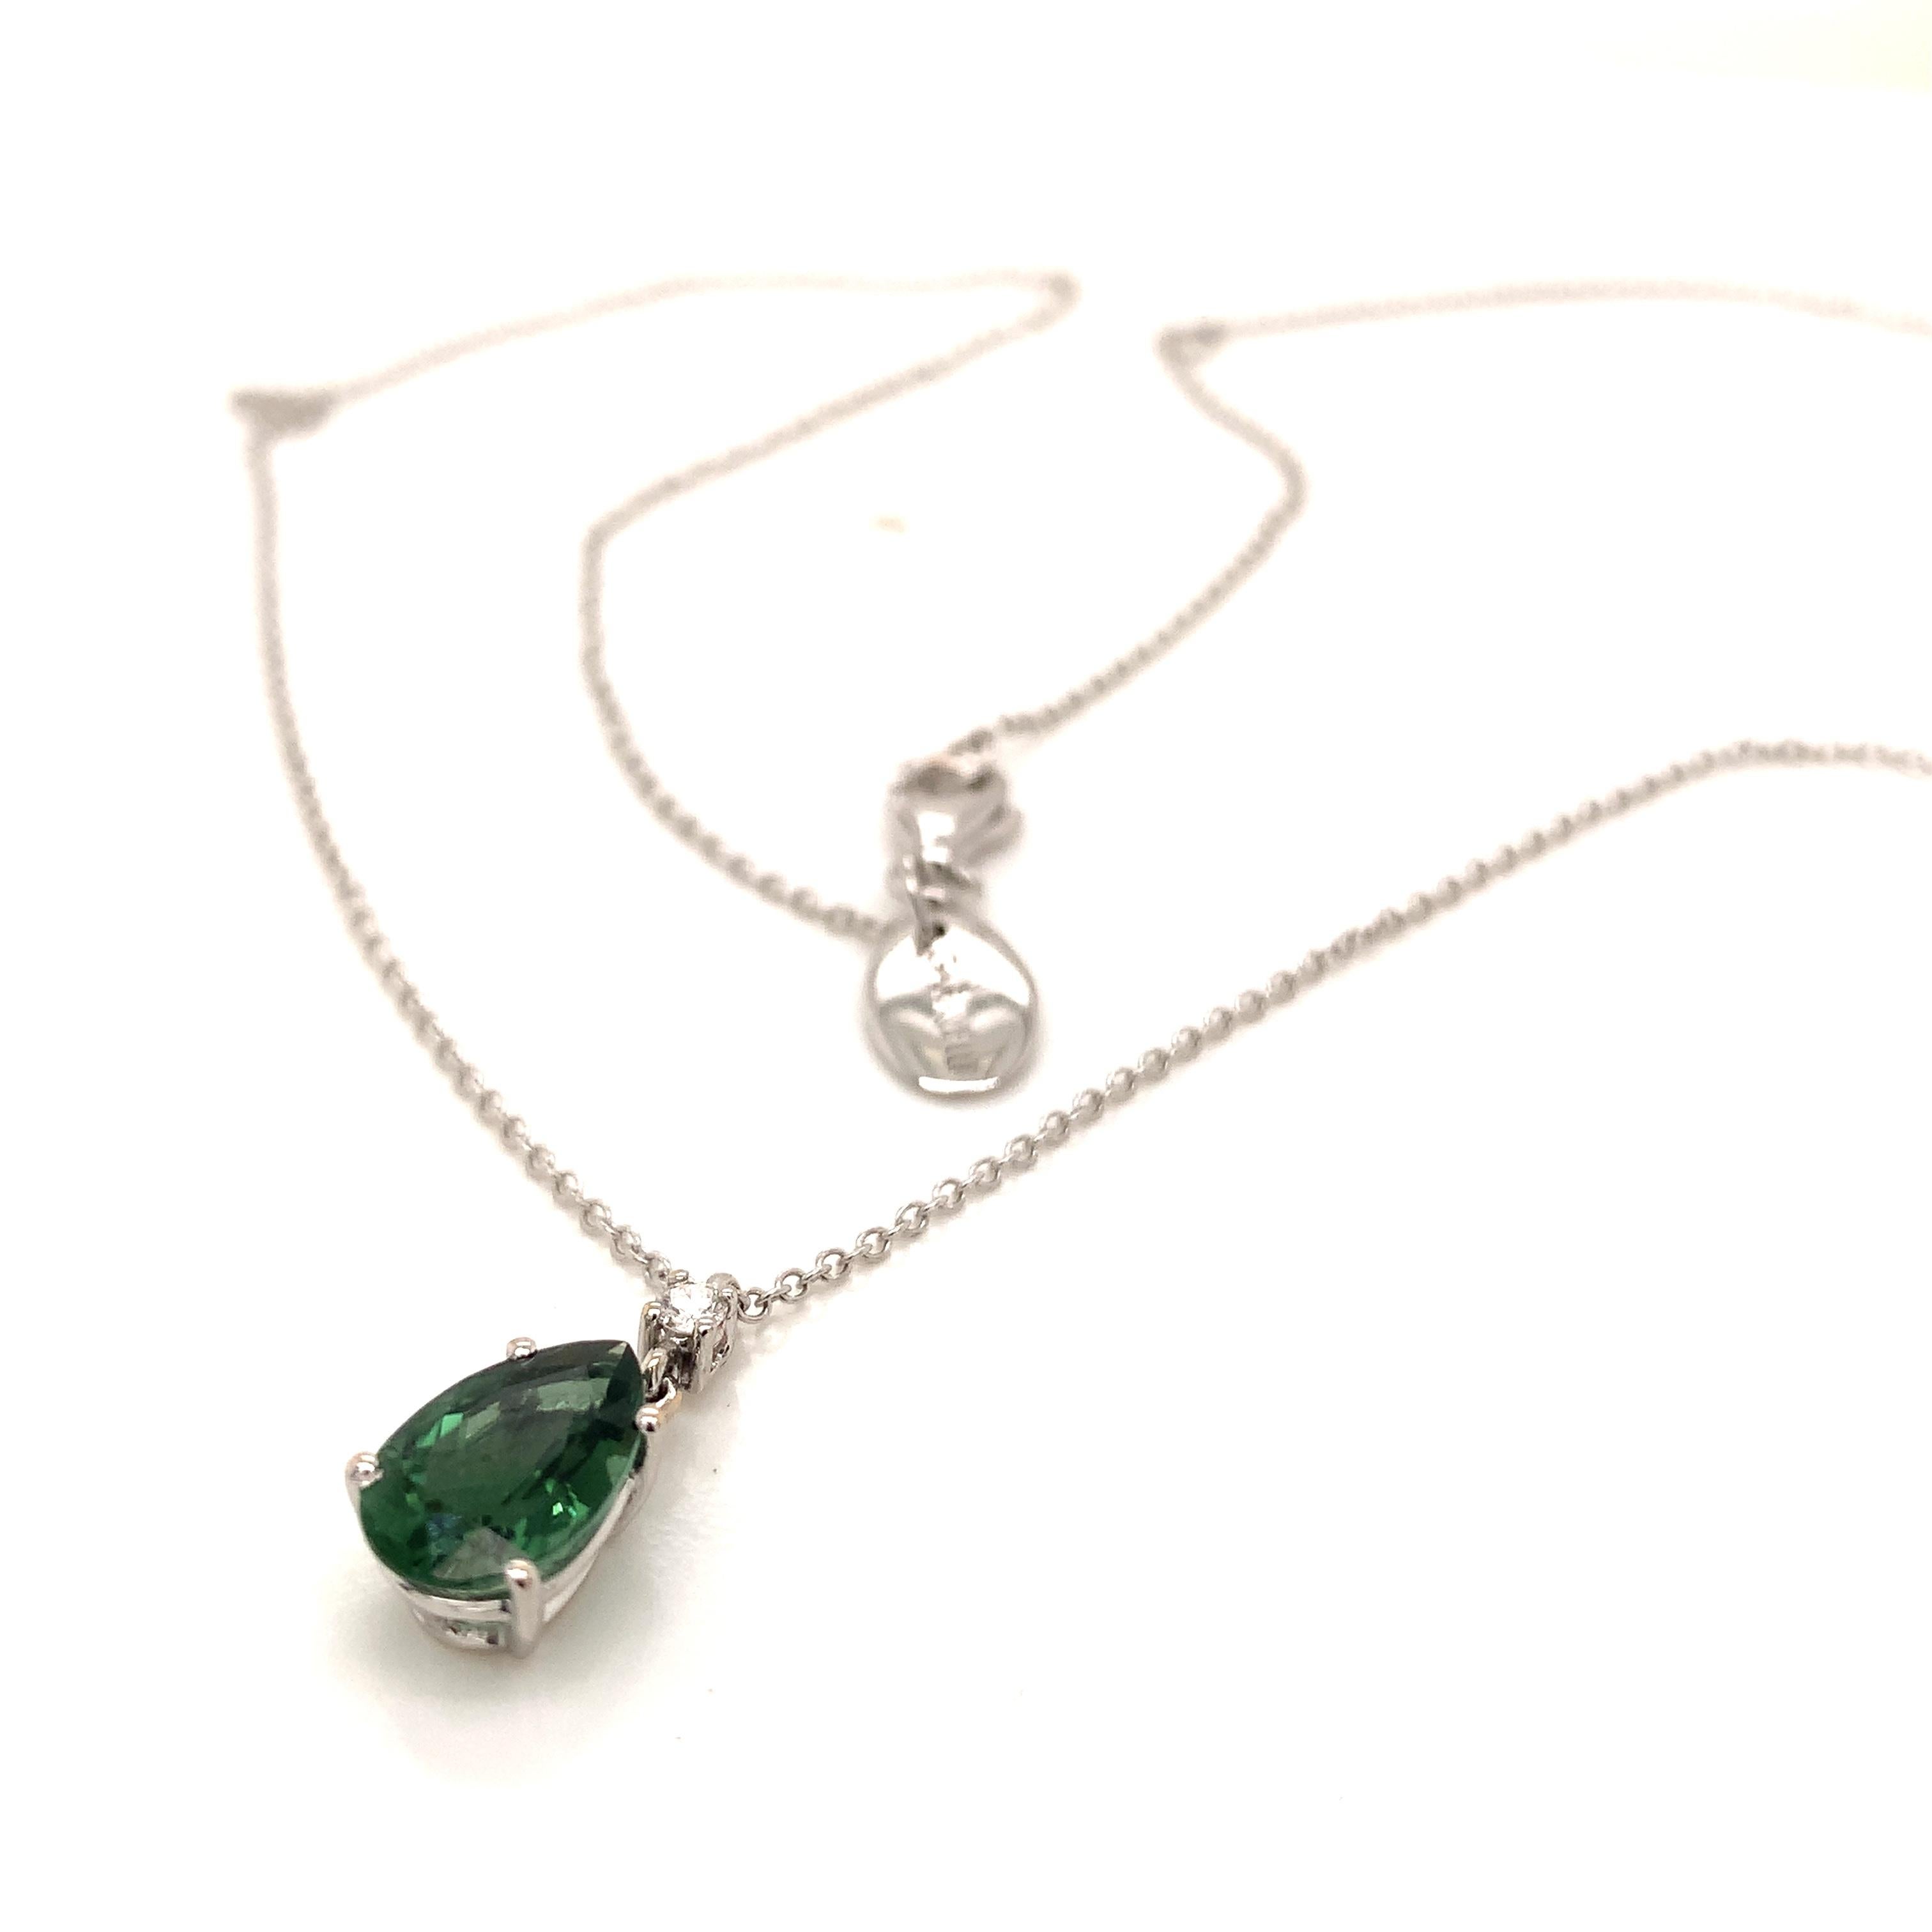 Garavelli pendant with chain in drop design, in white gold 18 kt with a pear shape cut green tourmaline and white diamond on top
 The total chain lenght is 44 cm / inches 17  with a loop at 40 cm /15.5 inches
18kt White Gold grs : 2.85
Green